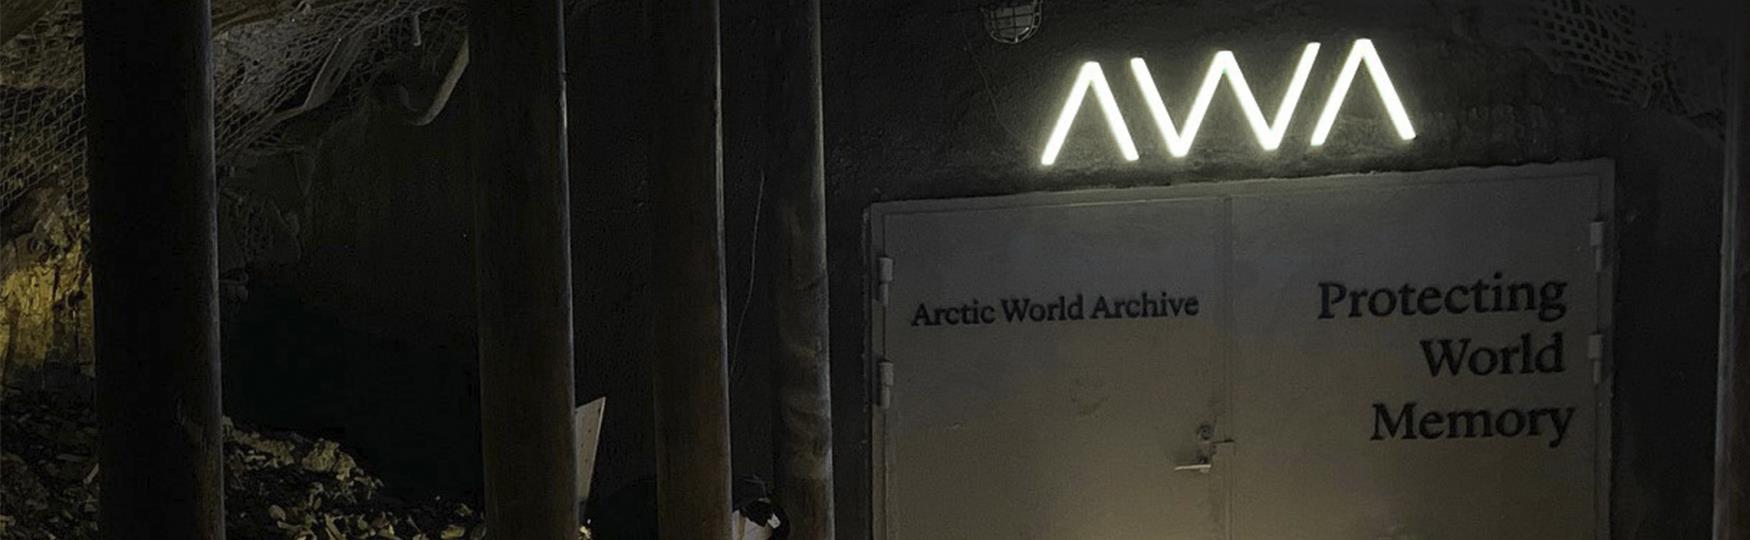 The Arctic World Archive